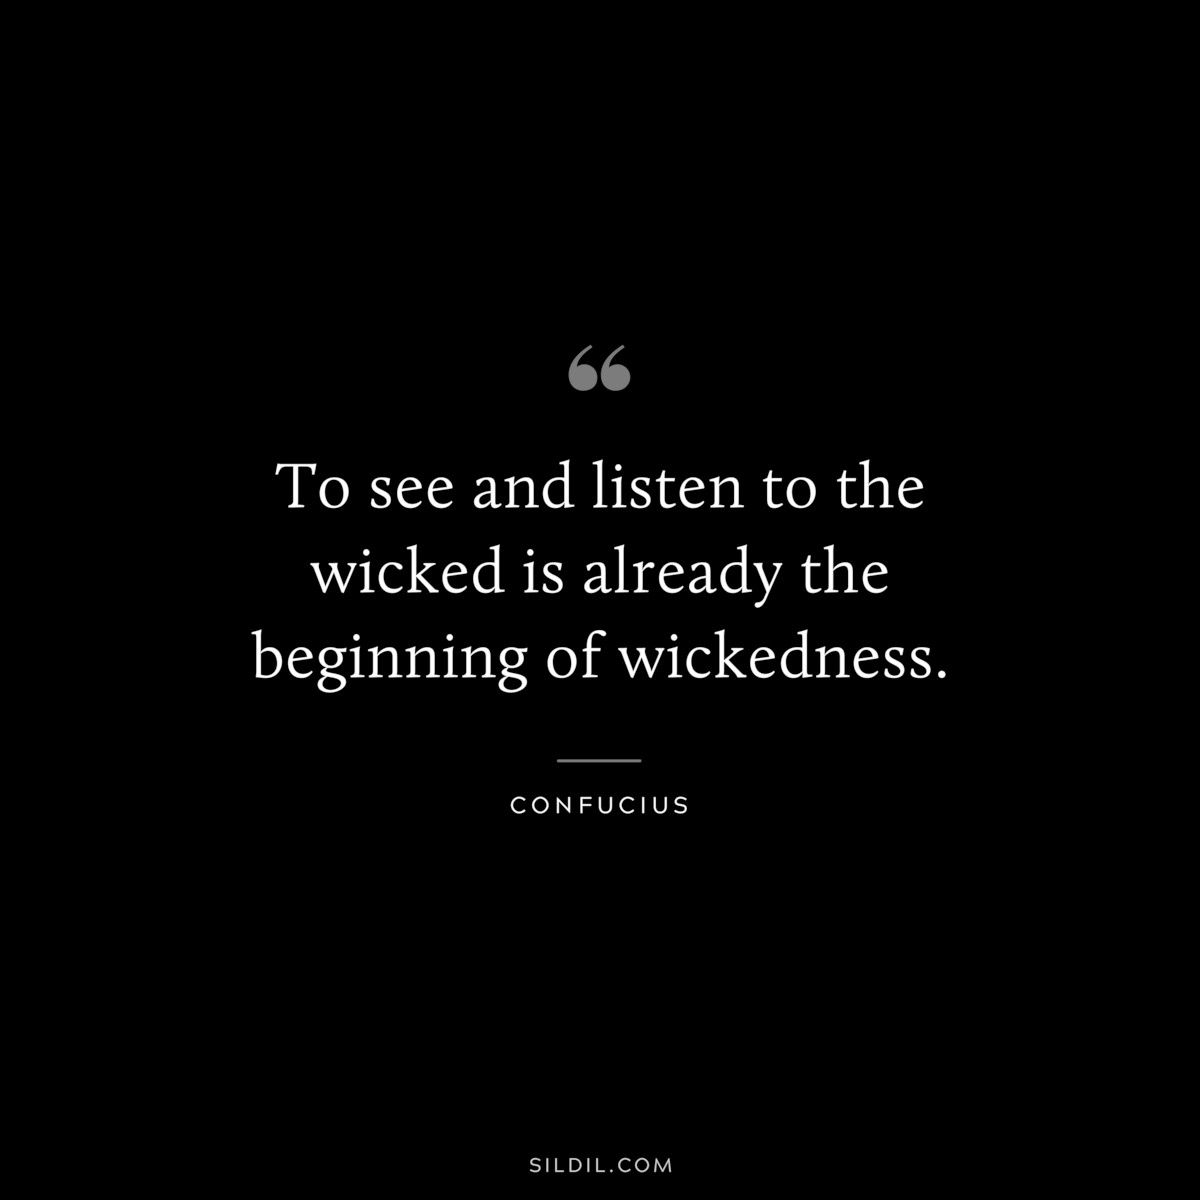 To see and listen to the wicked is already the beginning of wickedness. ― Confucius